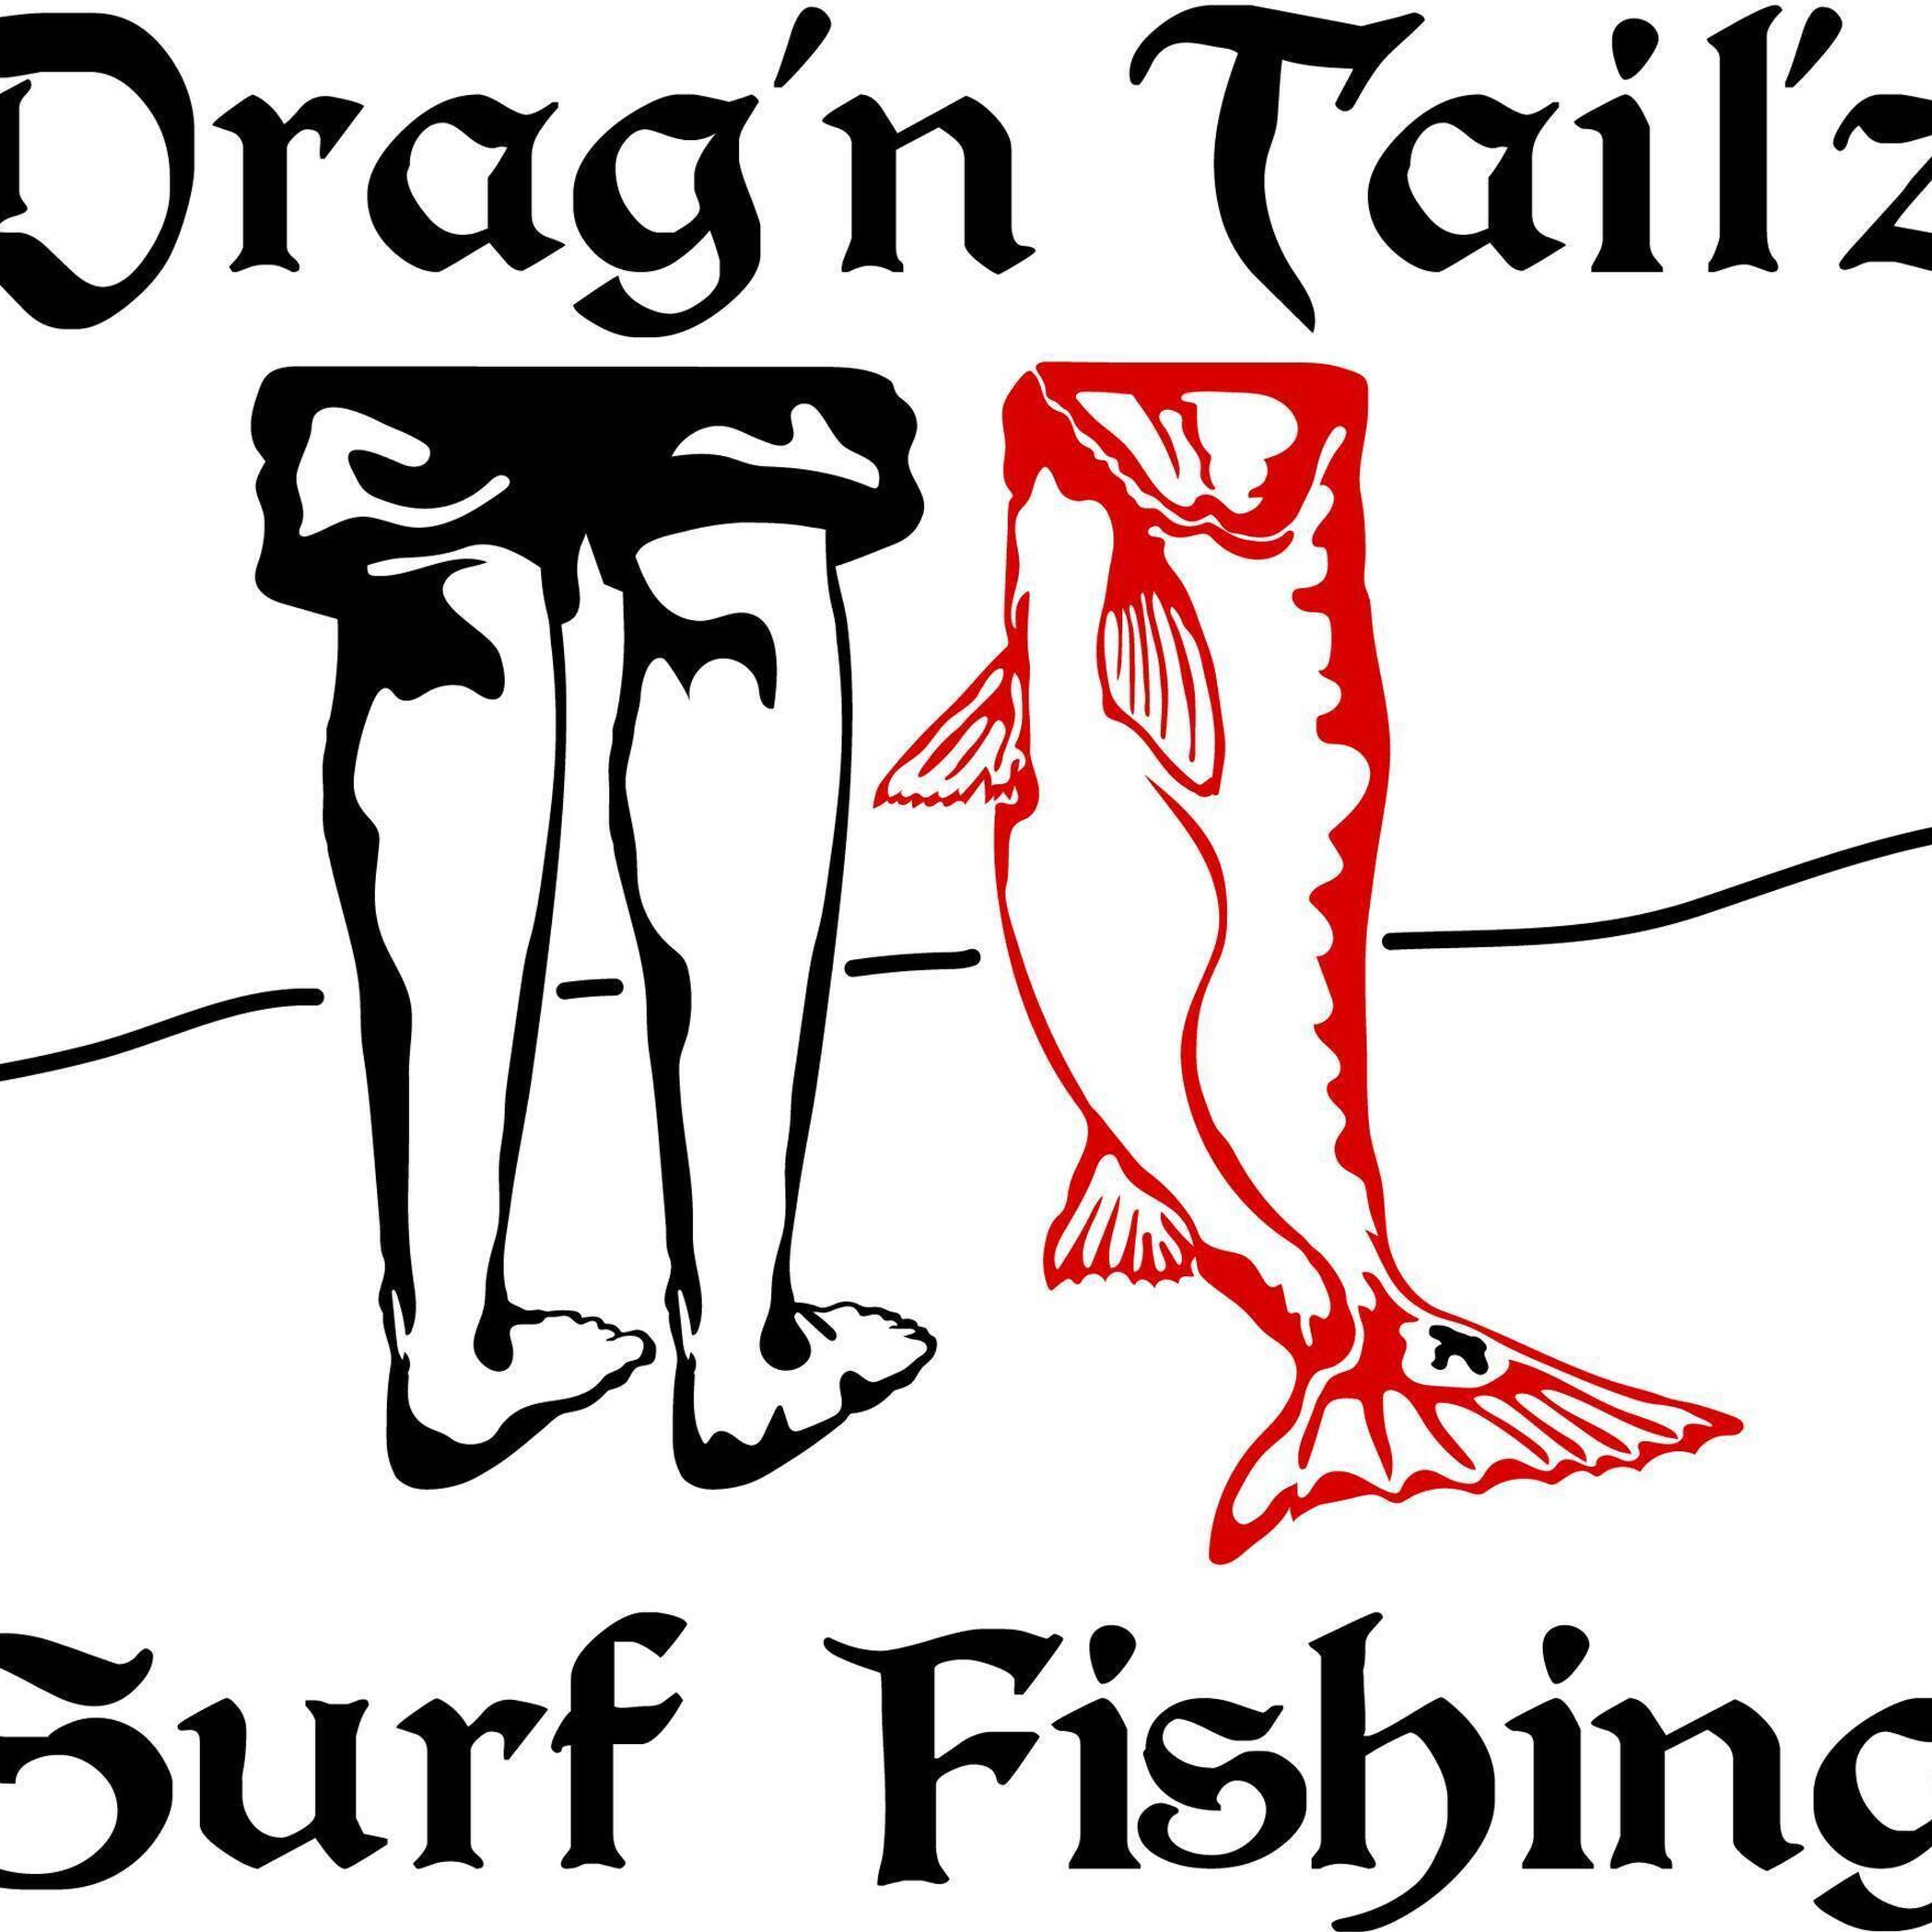 South West Louisiana Fishing with Drag'n Tail'z Surf Fishing